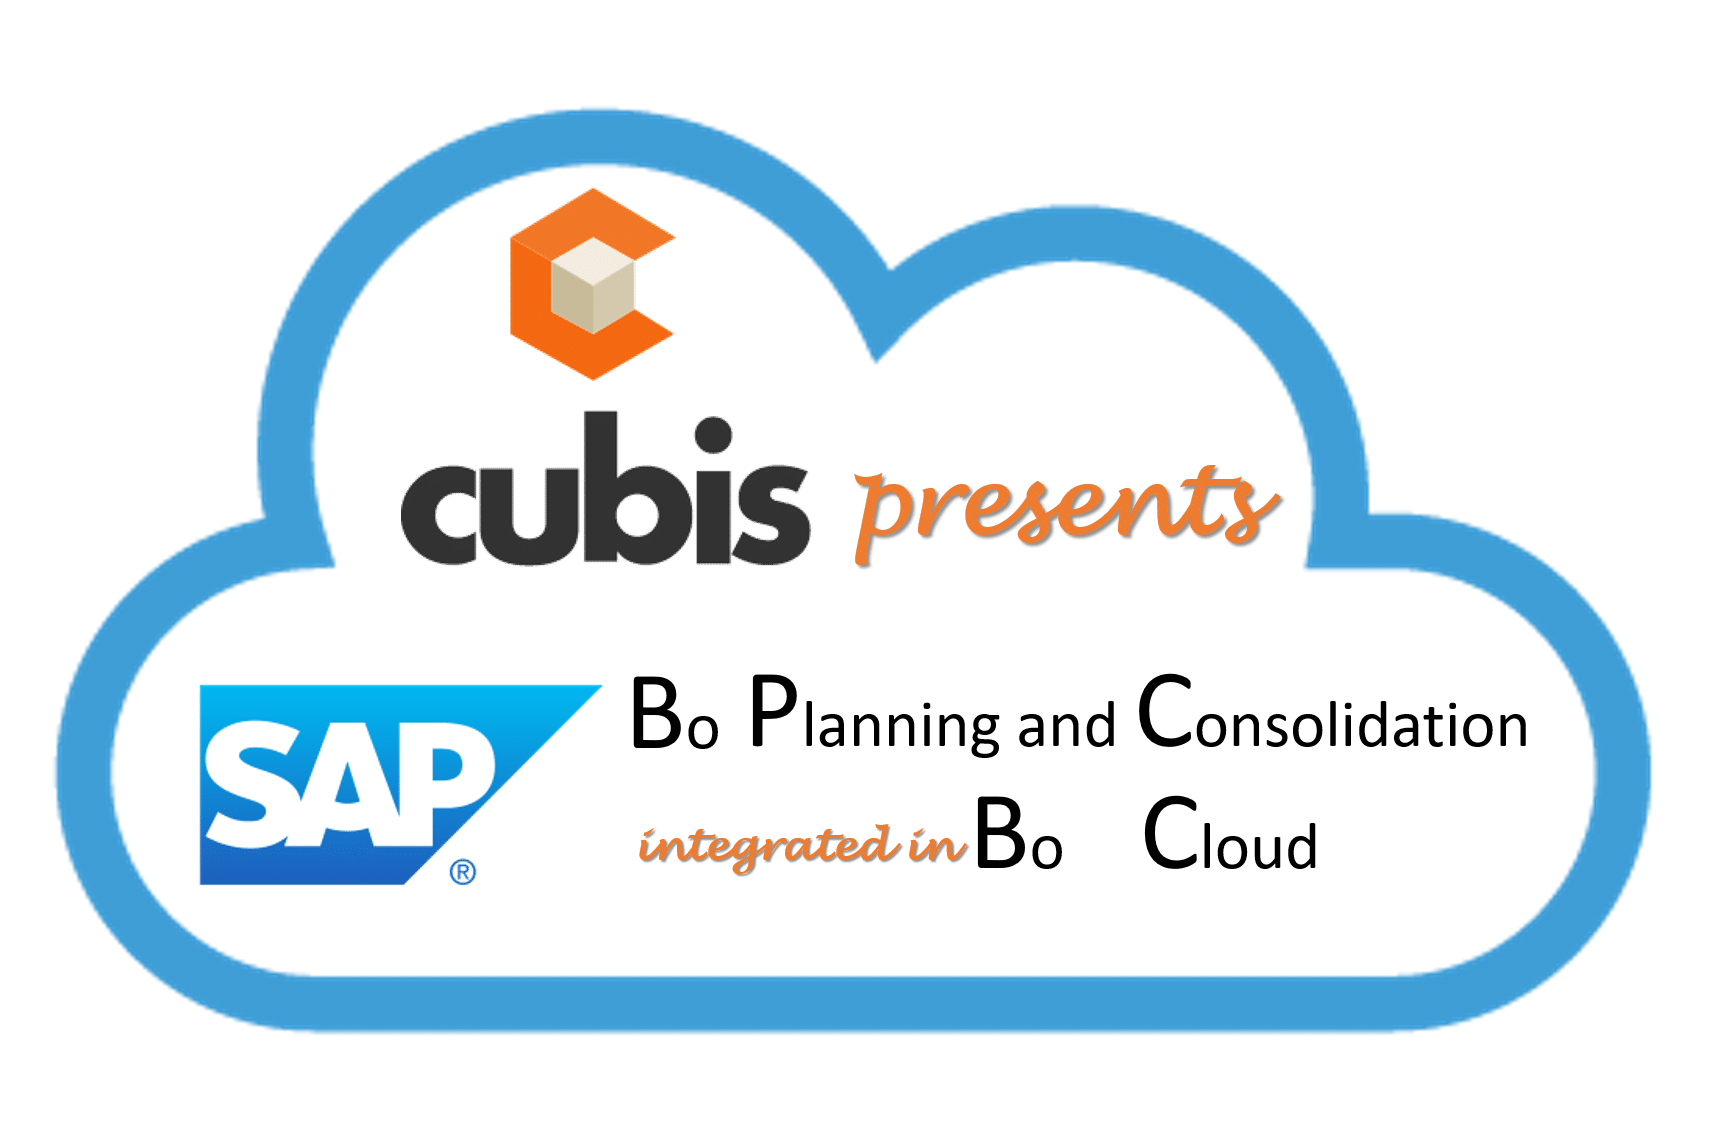 cubis-presents-bpc-integrated-in-cloud-2322526